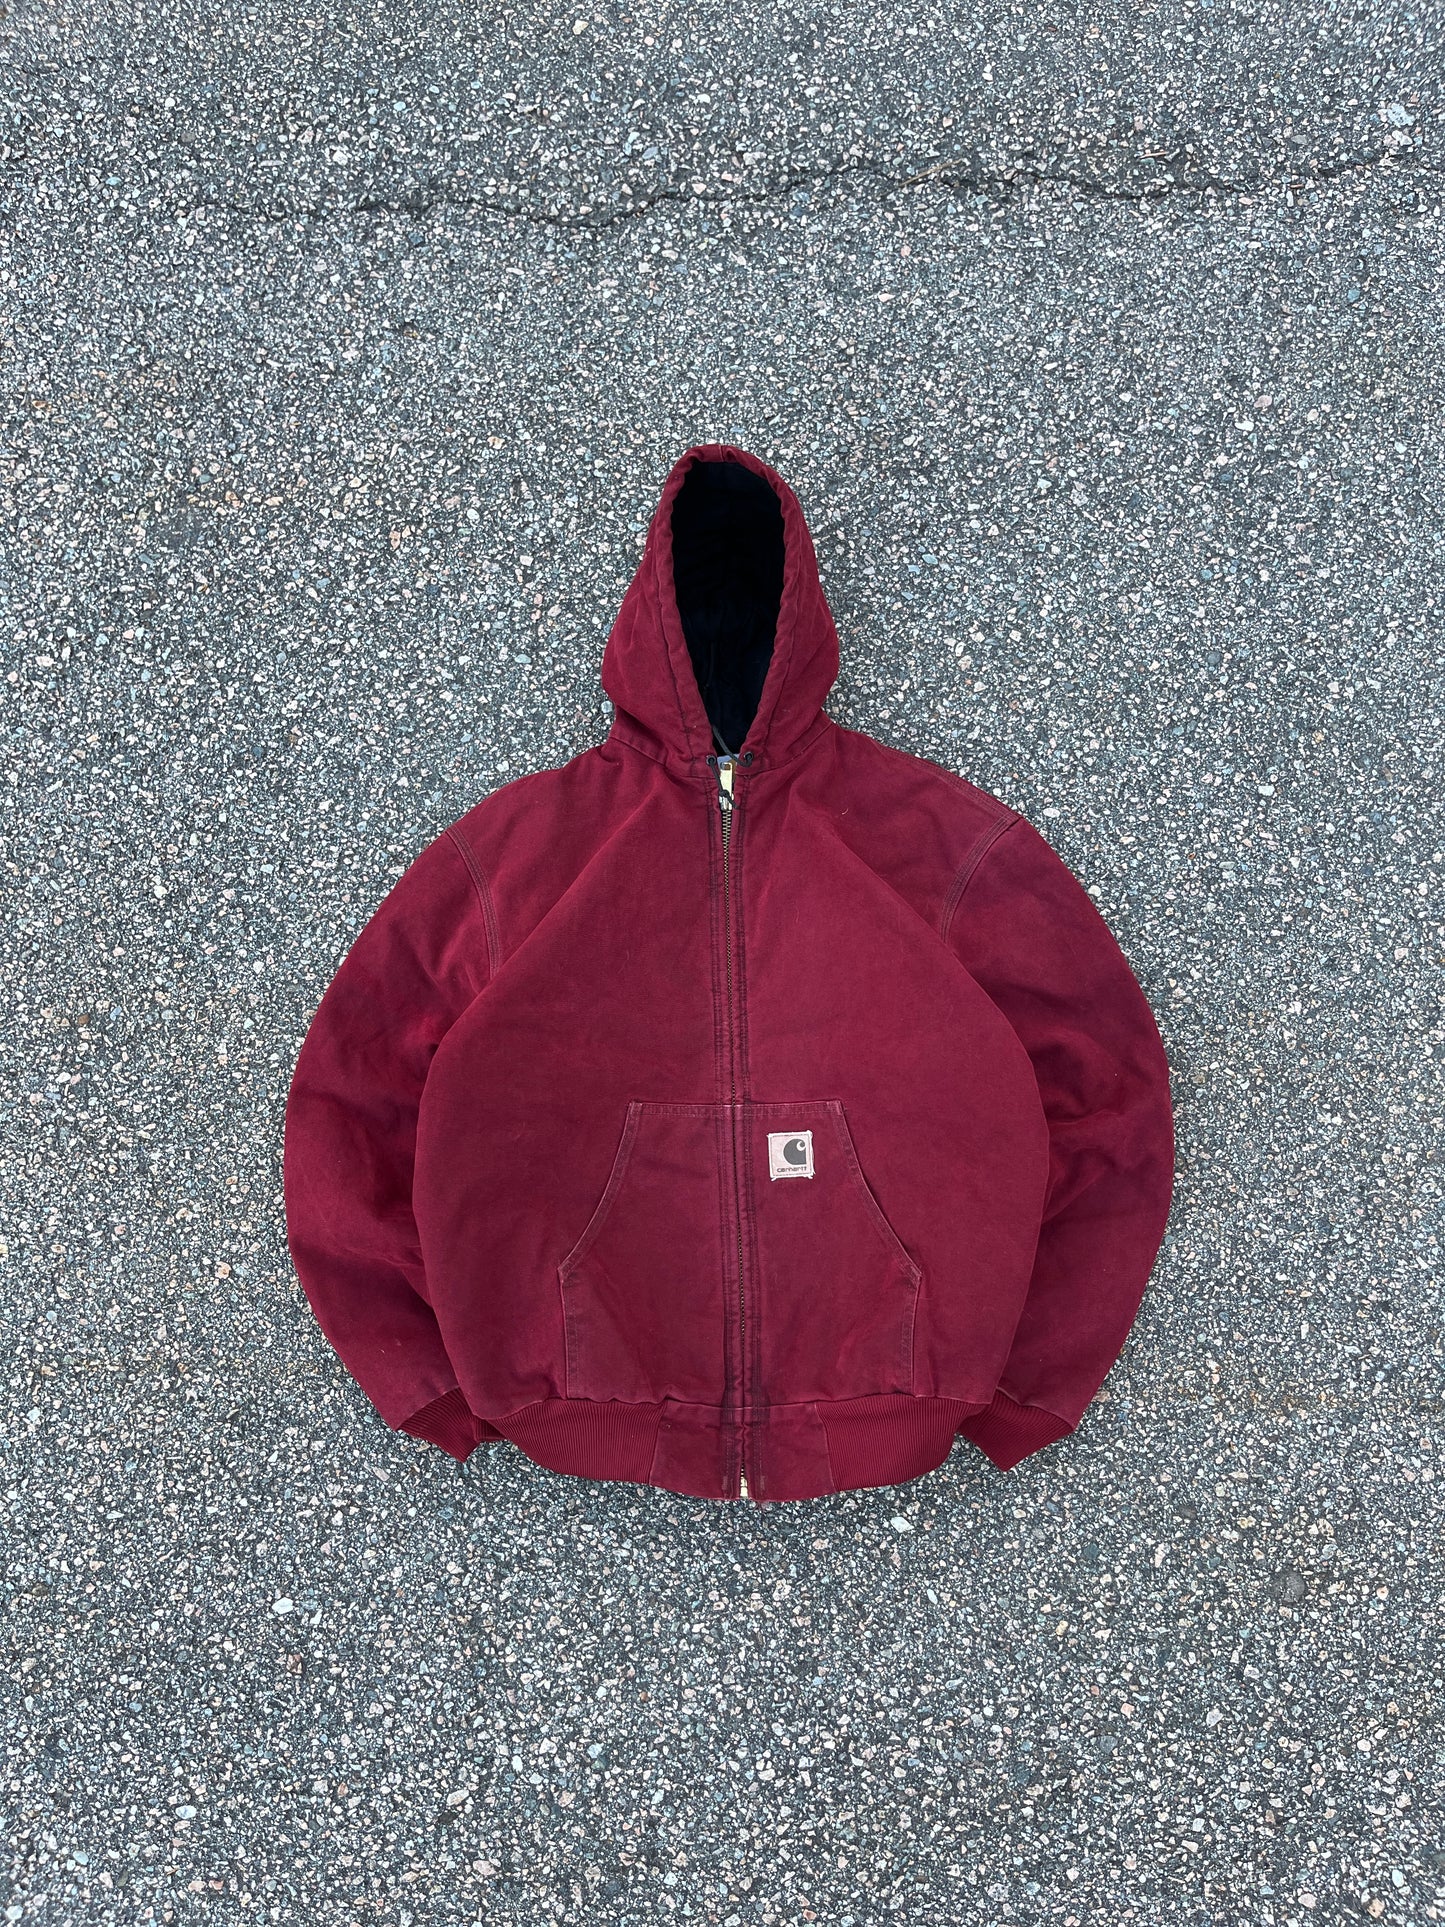 Faded Crimson Red Carhartt Active Jacket - Boxy L-XL